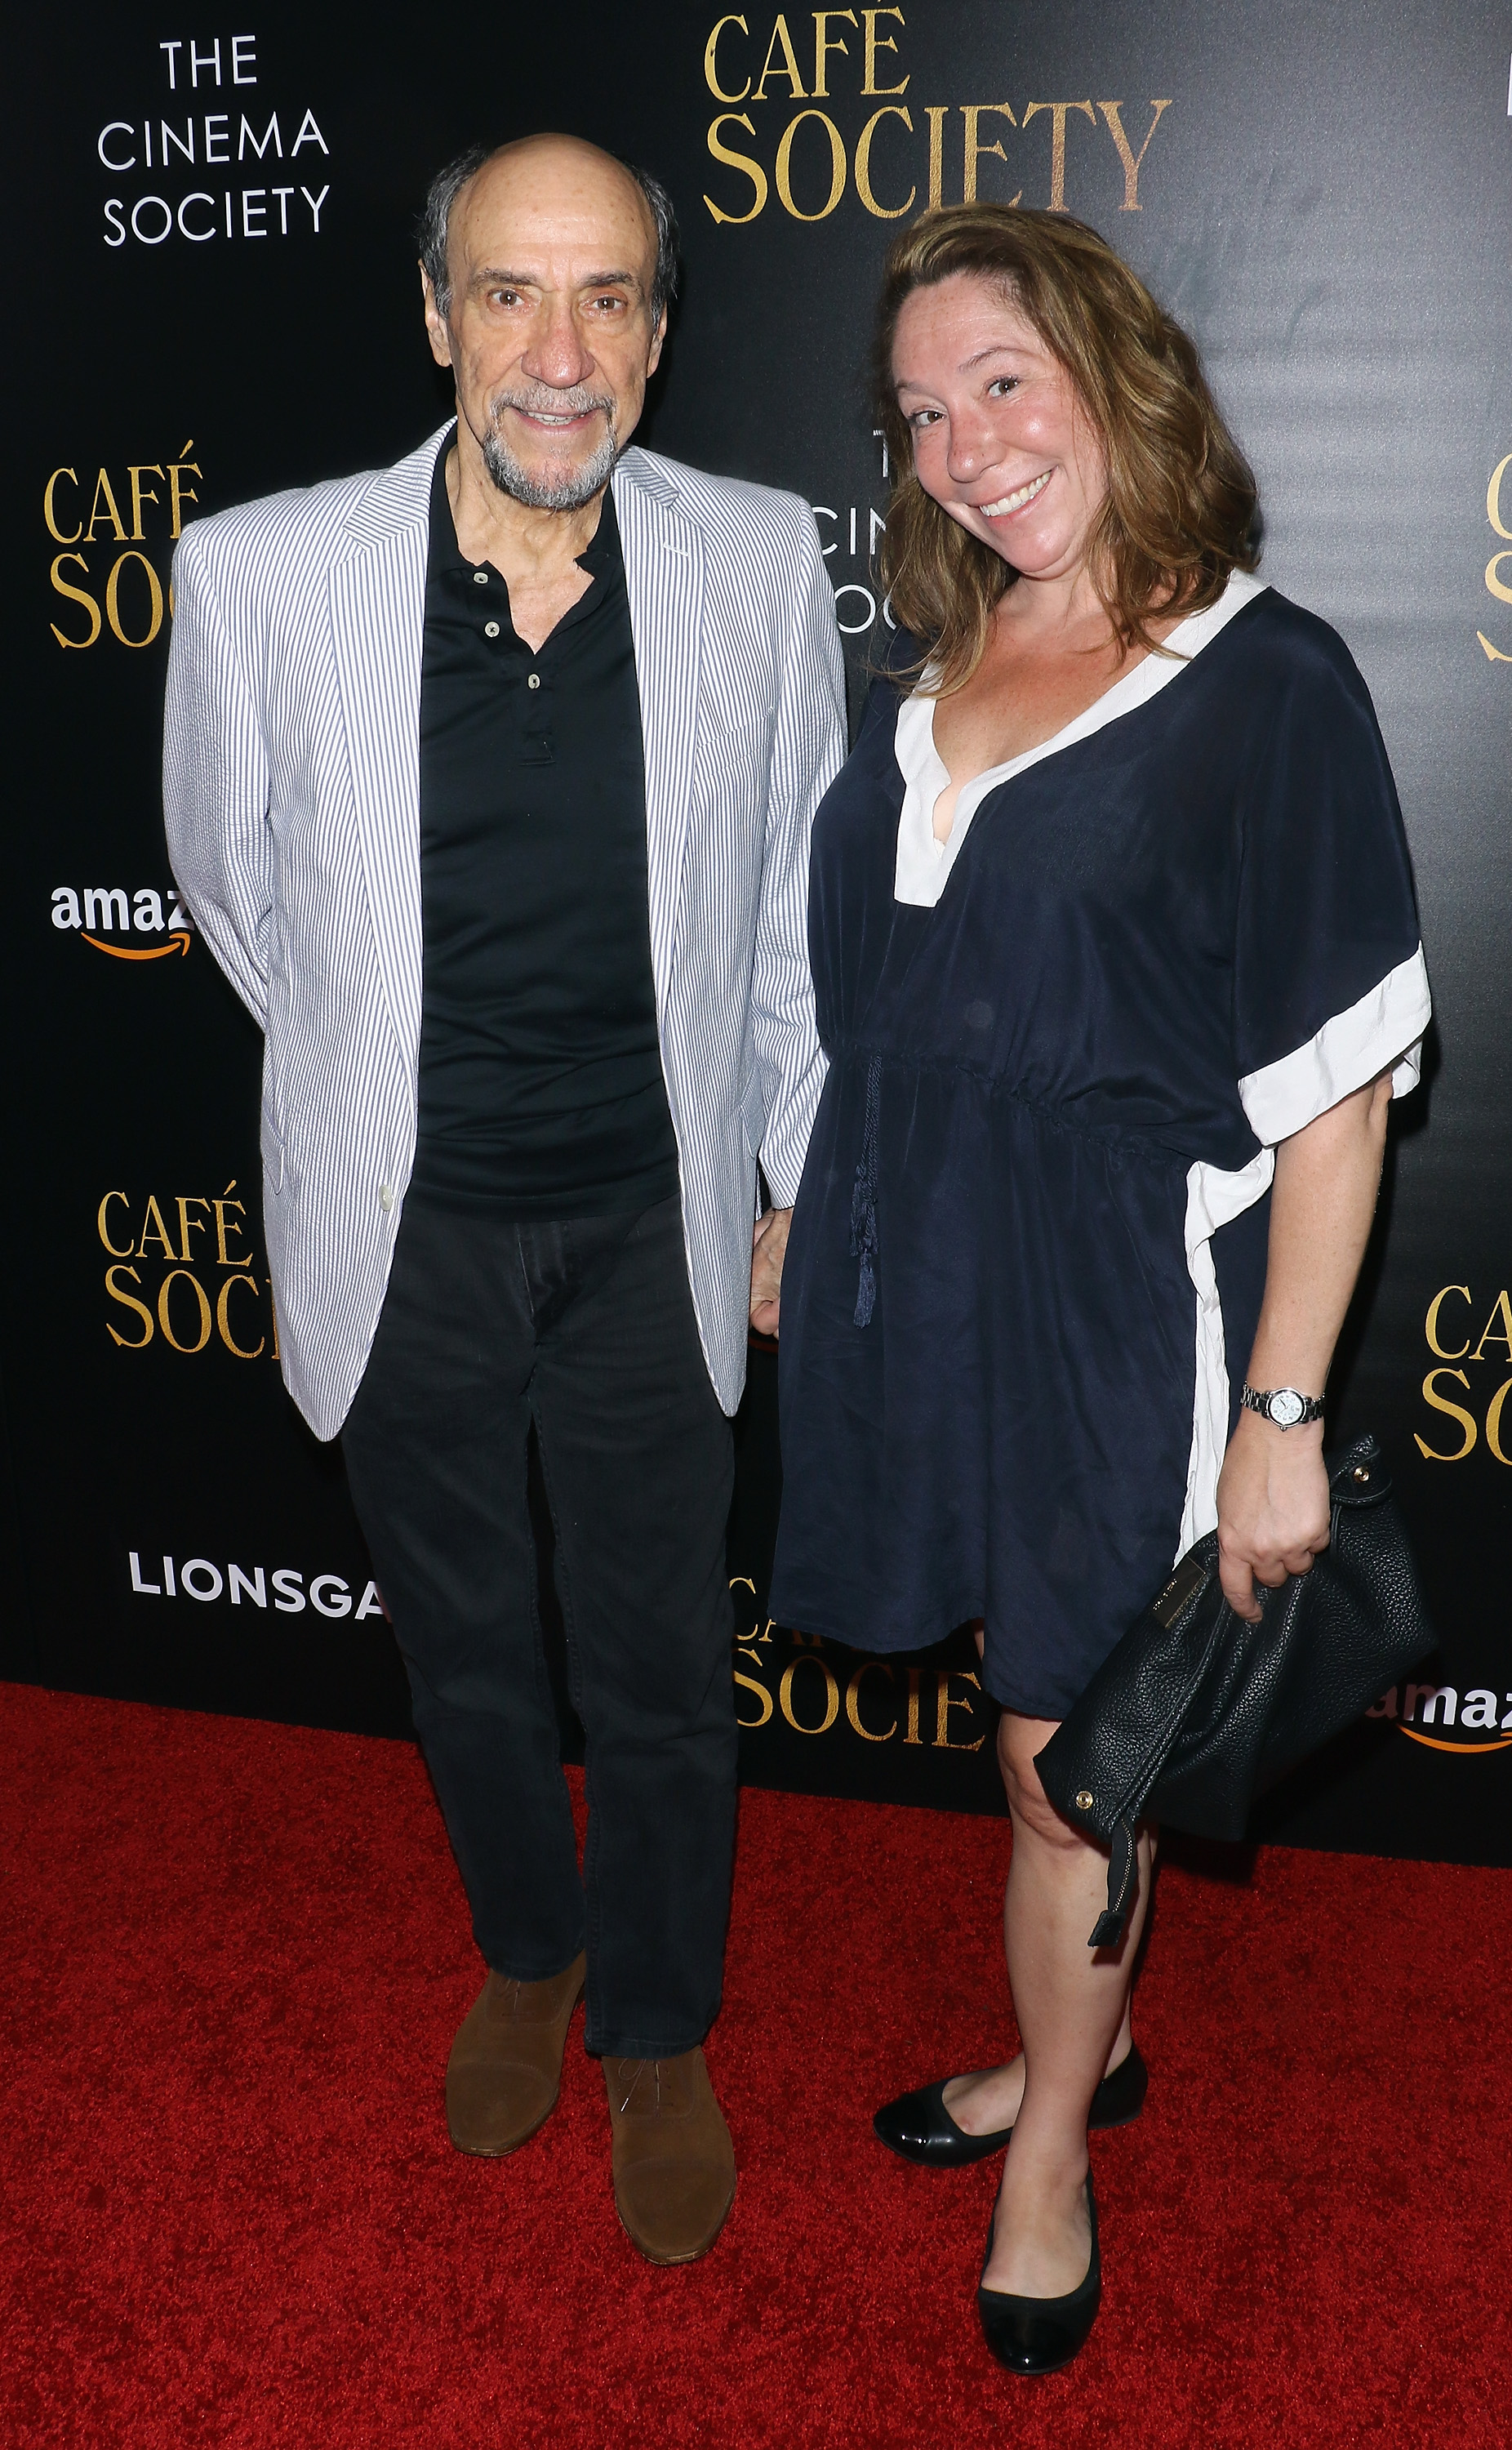 F. Murray Abraham and Kate Hannan attend the New York premiere of "Cafe Society" hosted by Amazon & Lionsgate with The Cinema Society at Paris Theatre on July 13, 2016, in New York City. | Source: Getty Images